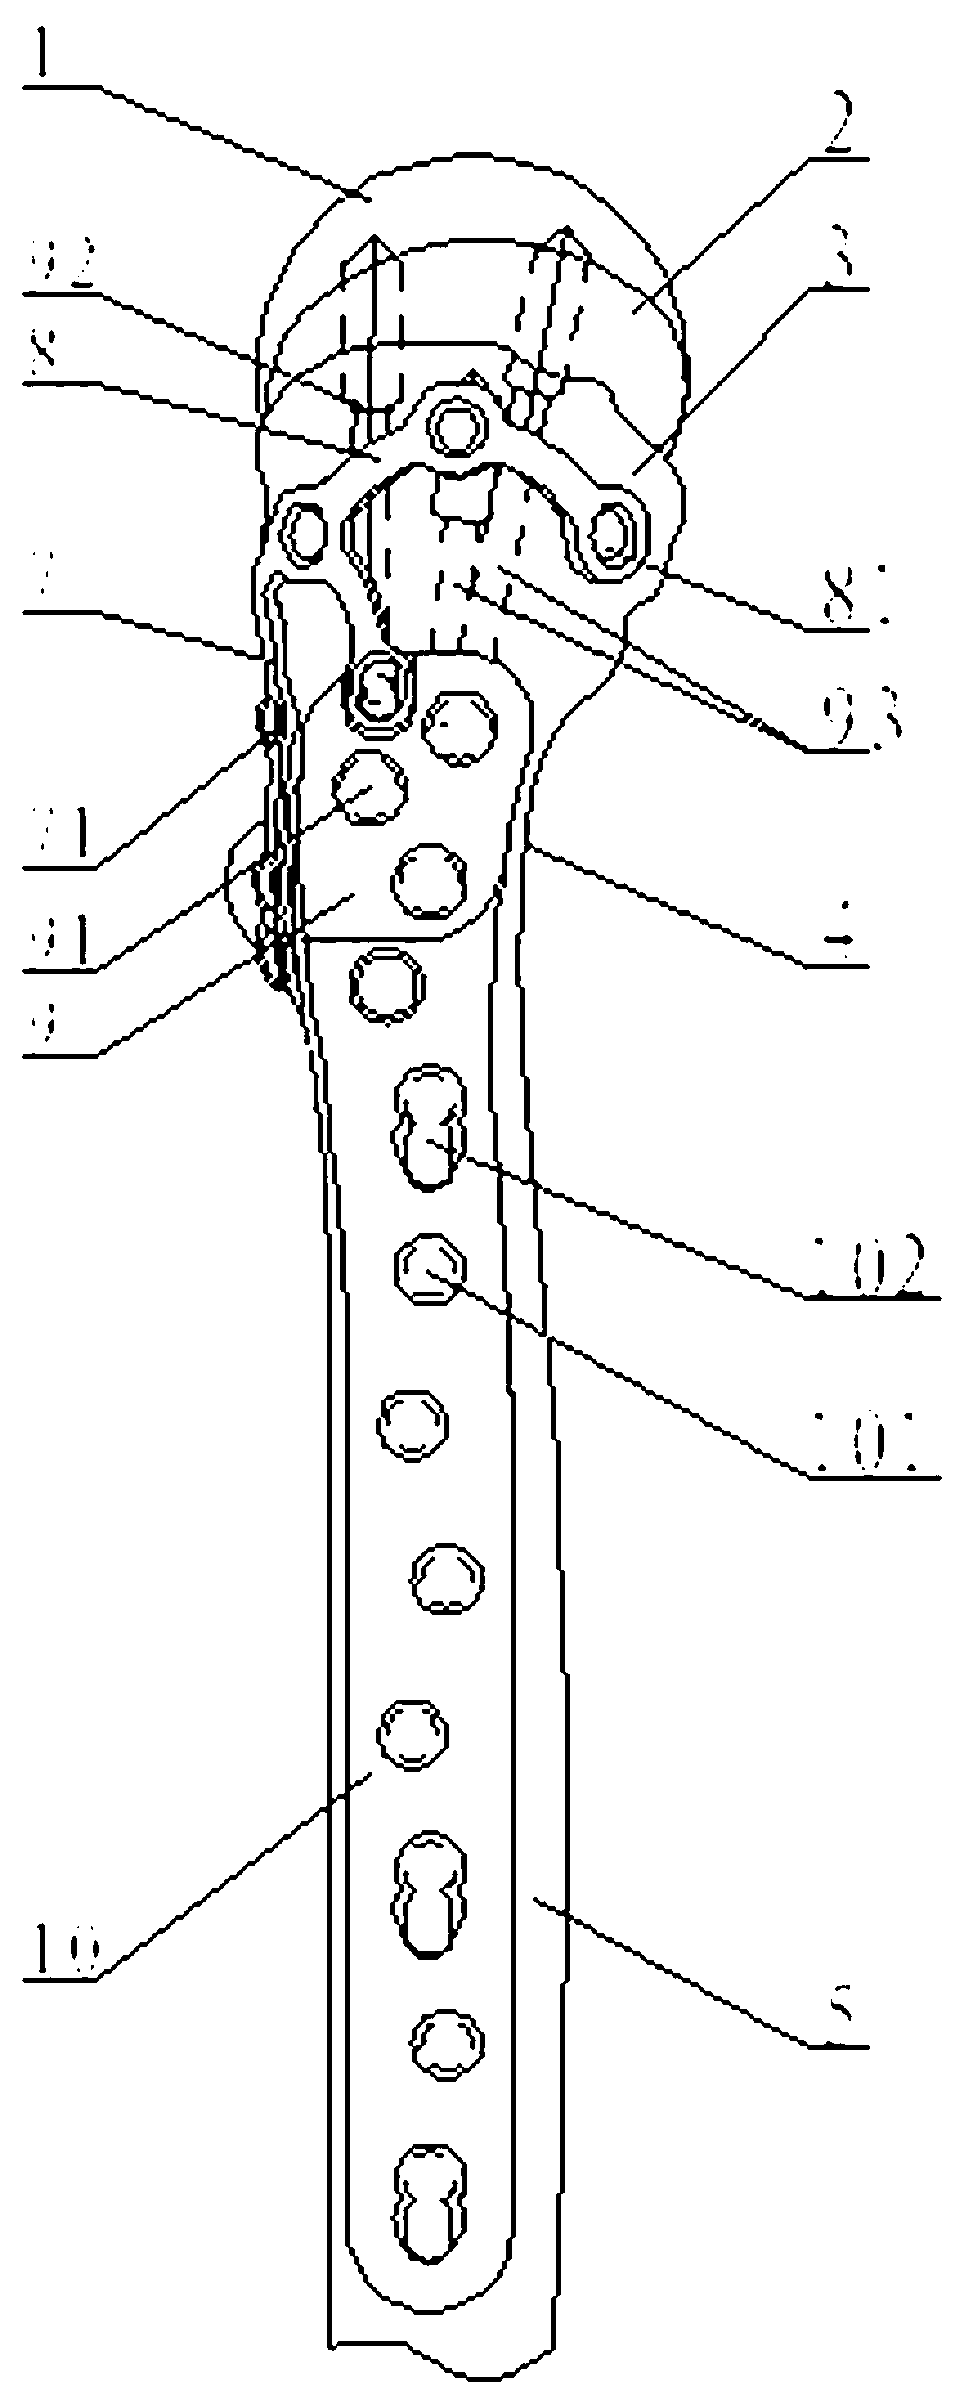 Combined implanting system for minimally invasive thigh bone